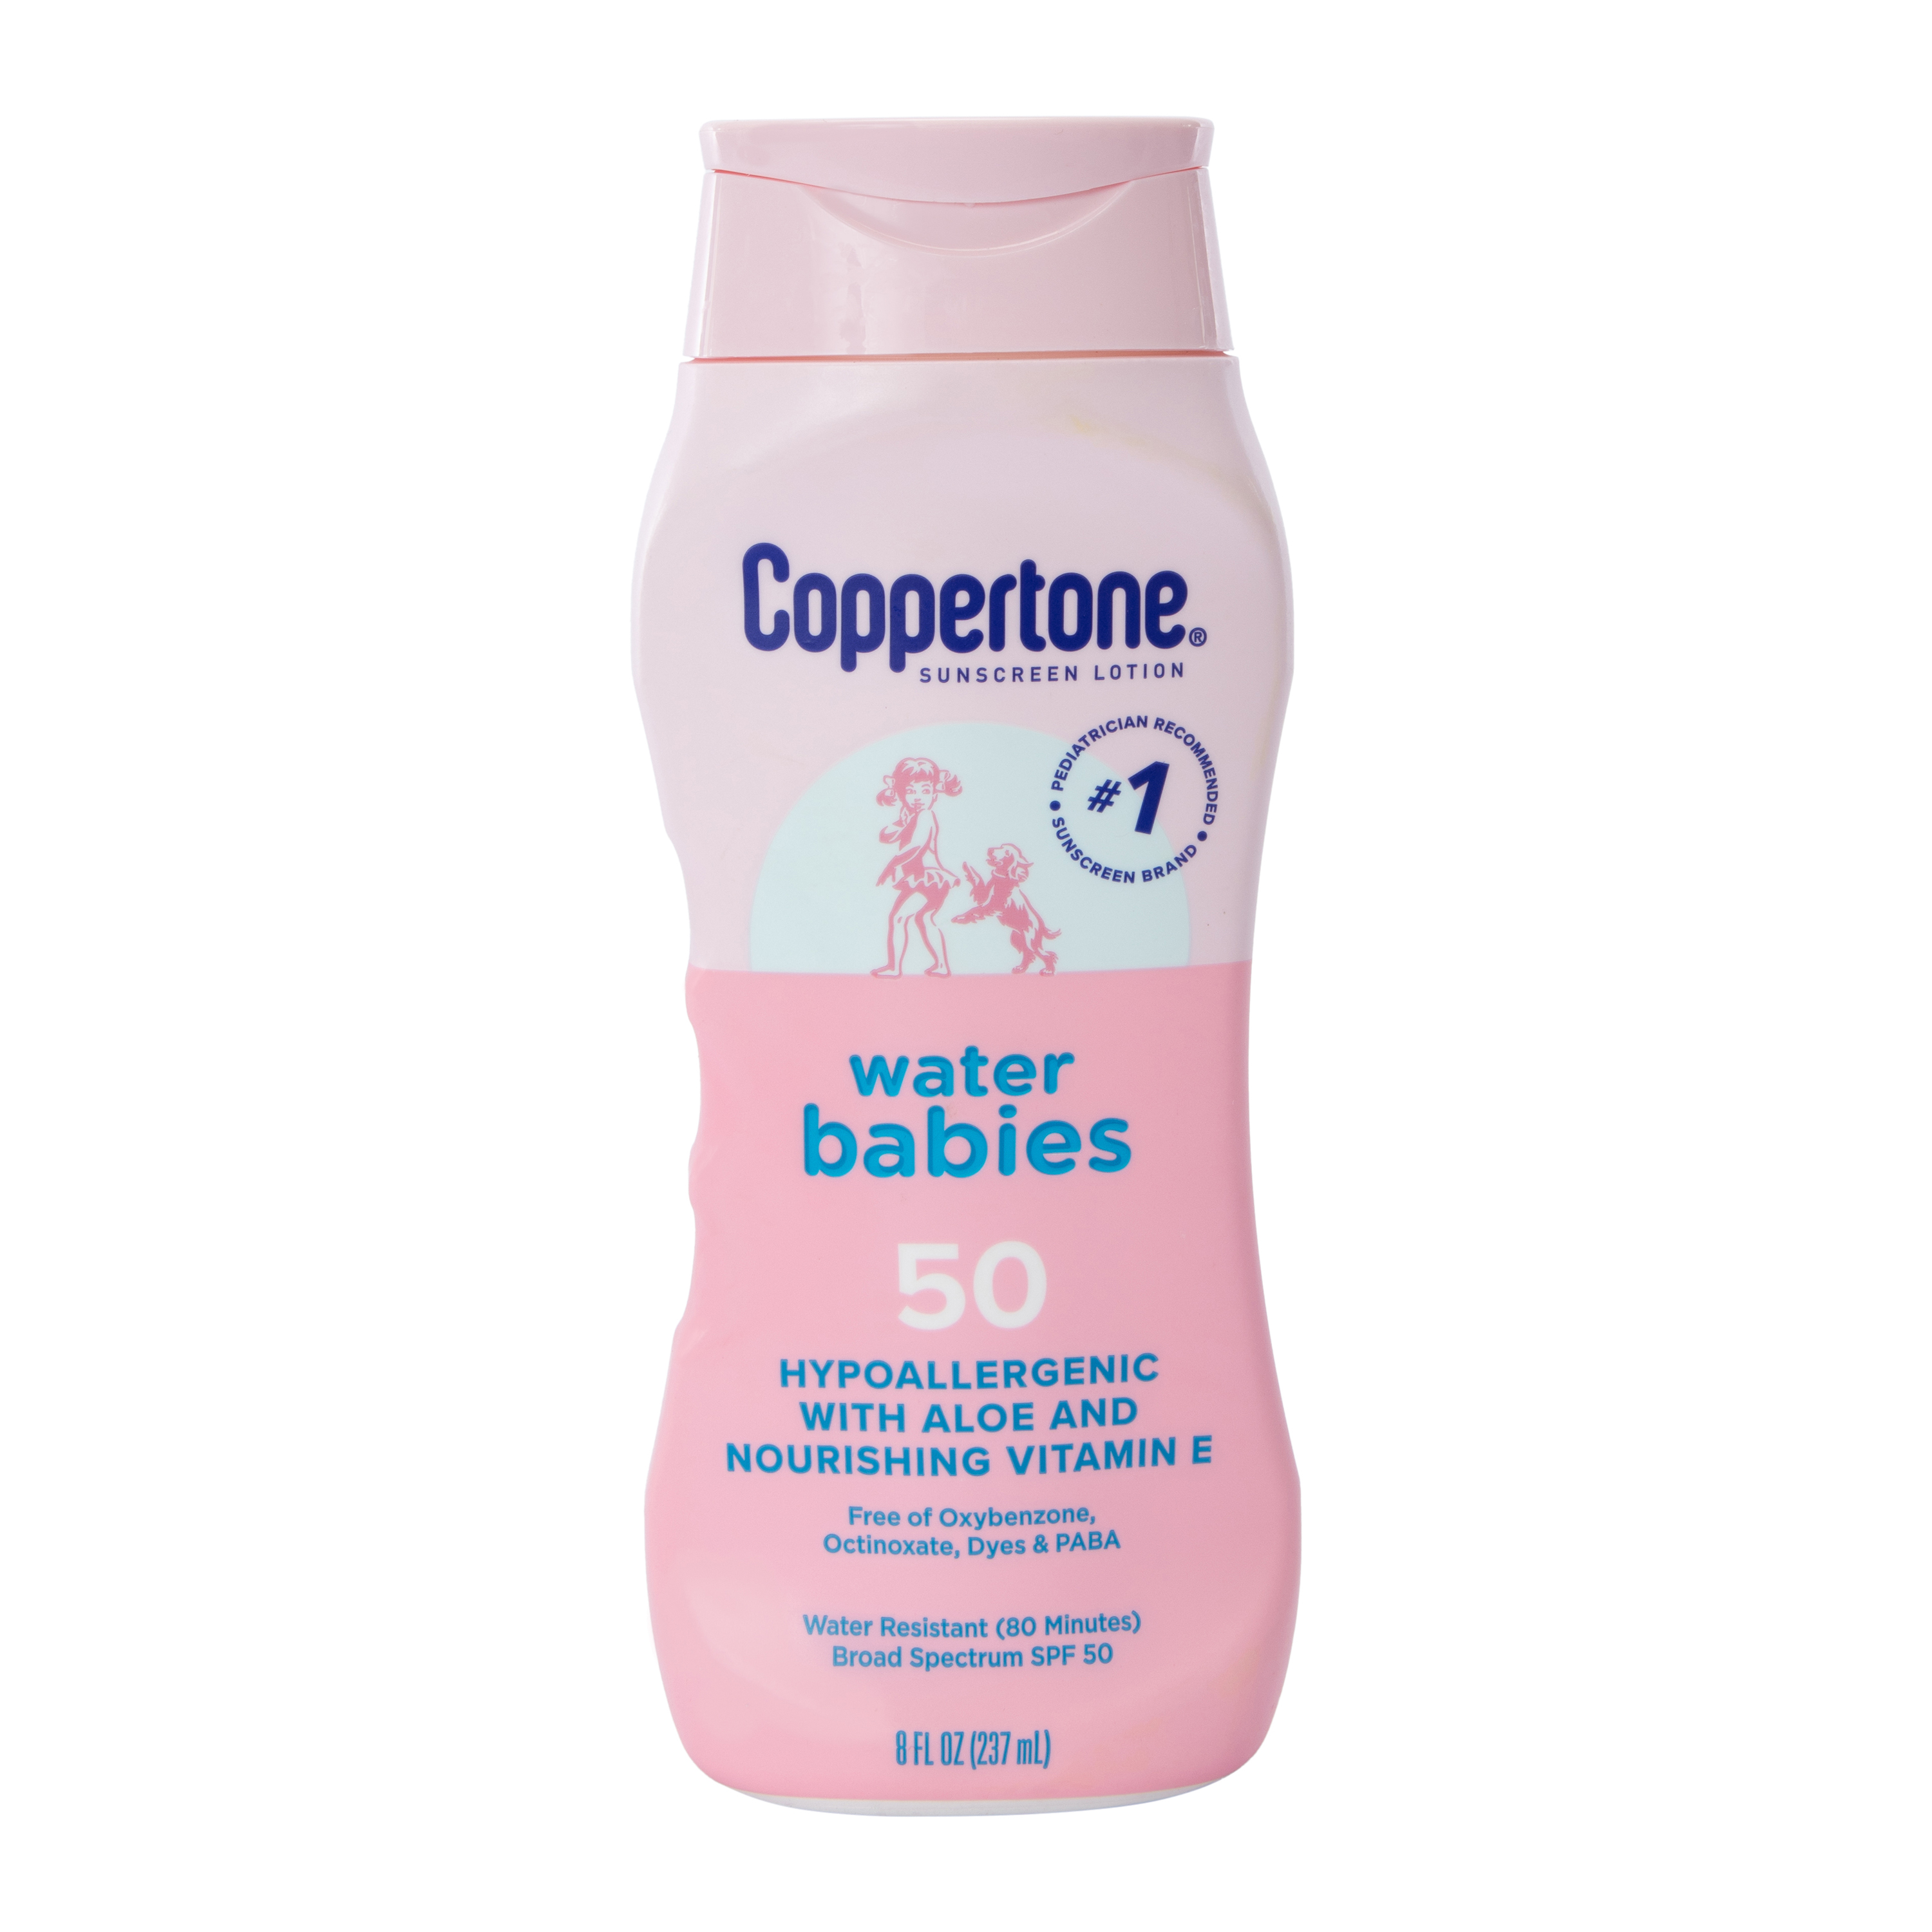 Coppertone® Water Babies SPF 50 Sunscreen Lotion 8oz